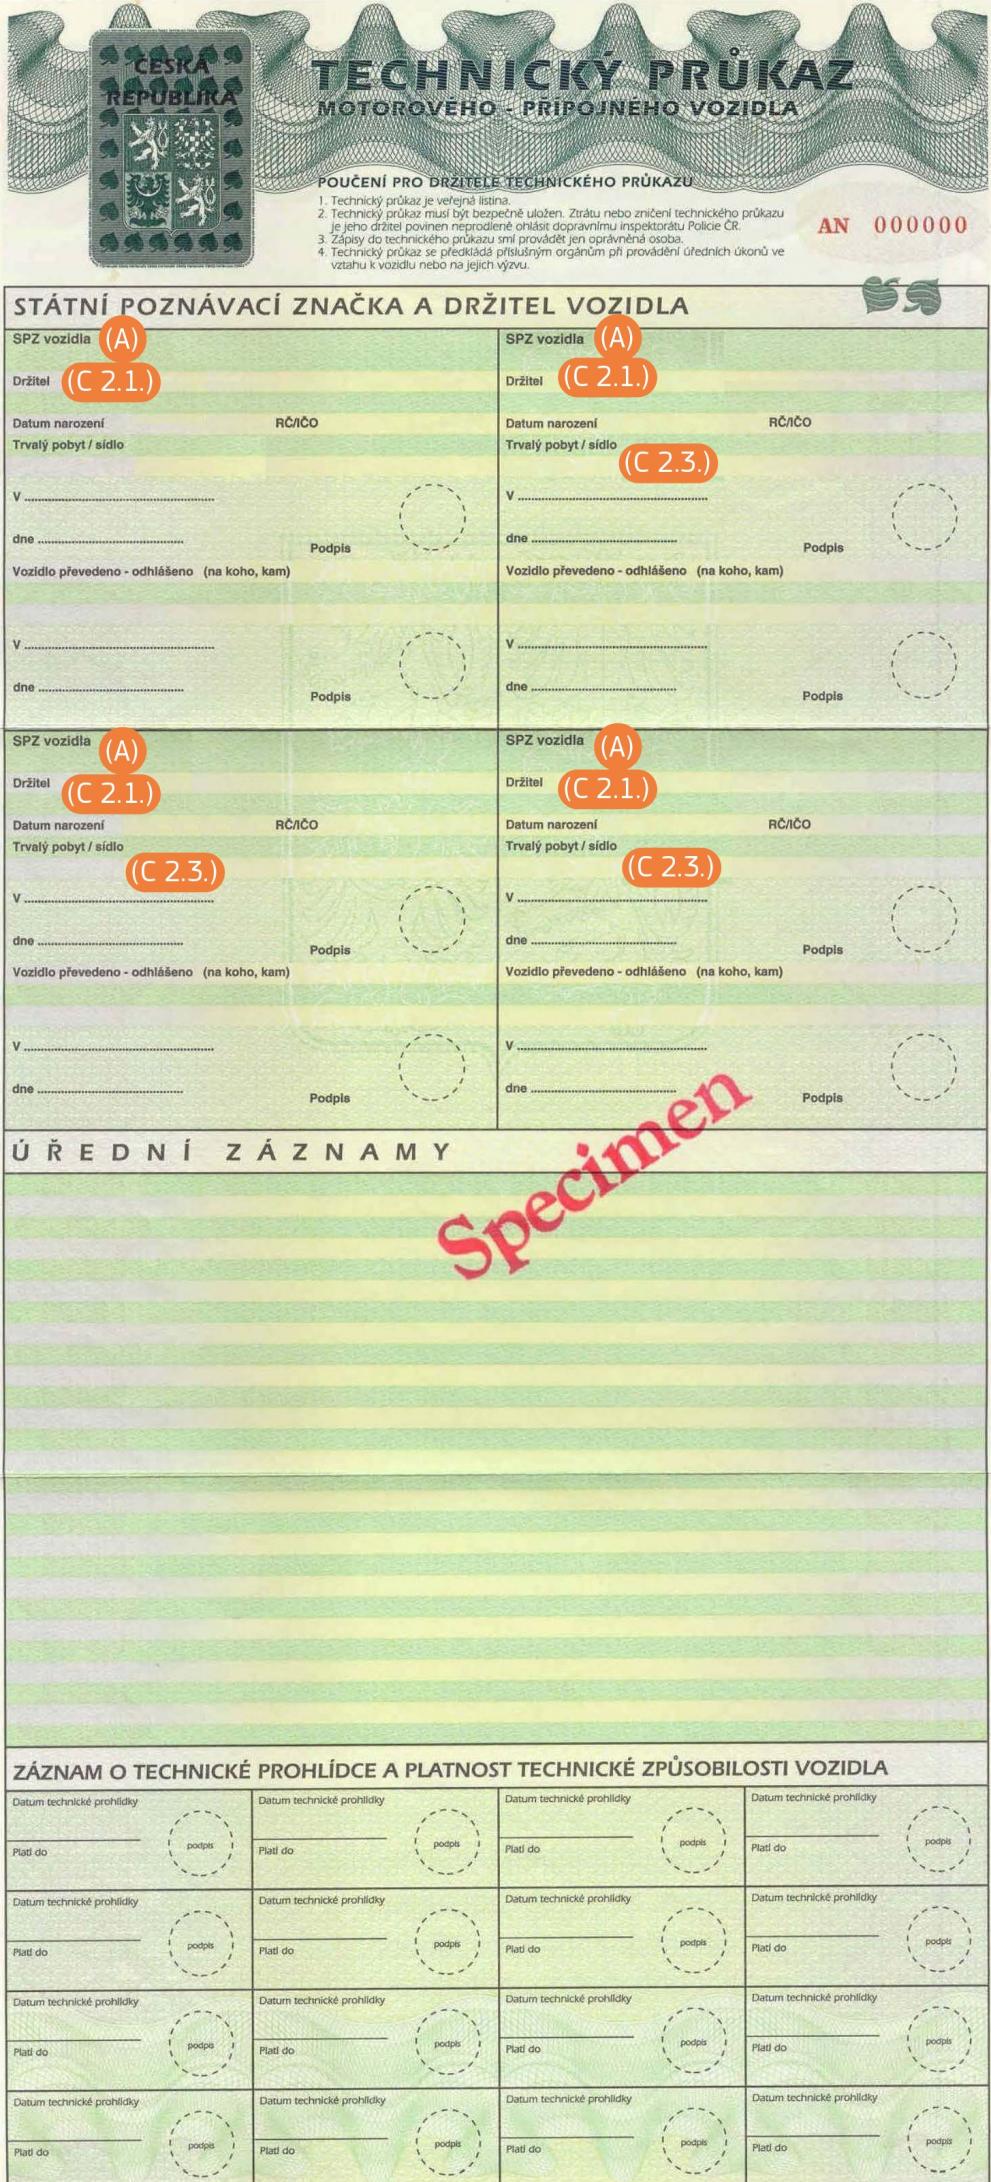 Czechia VRC 1996 part 2 front with codes